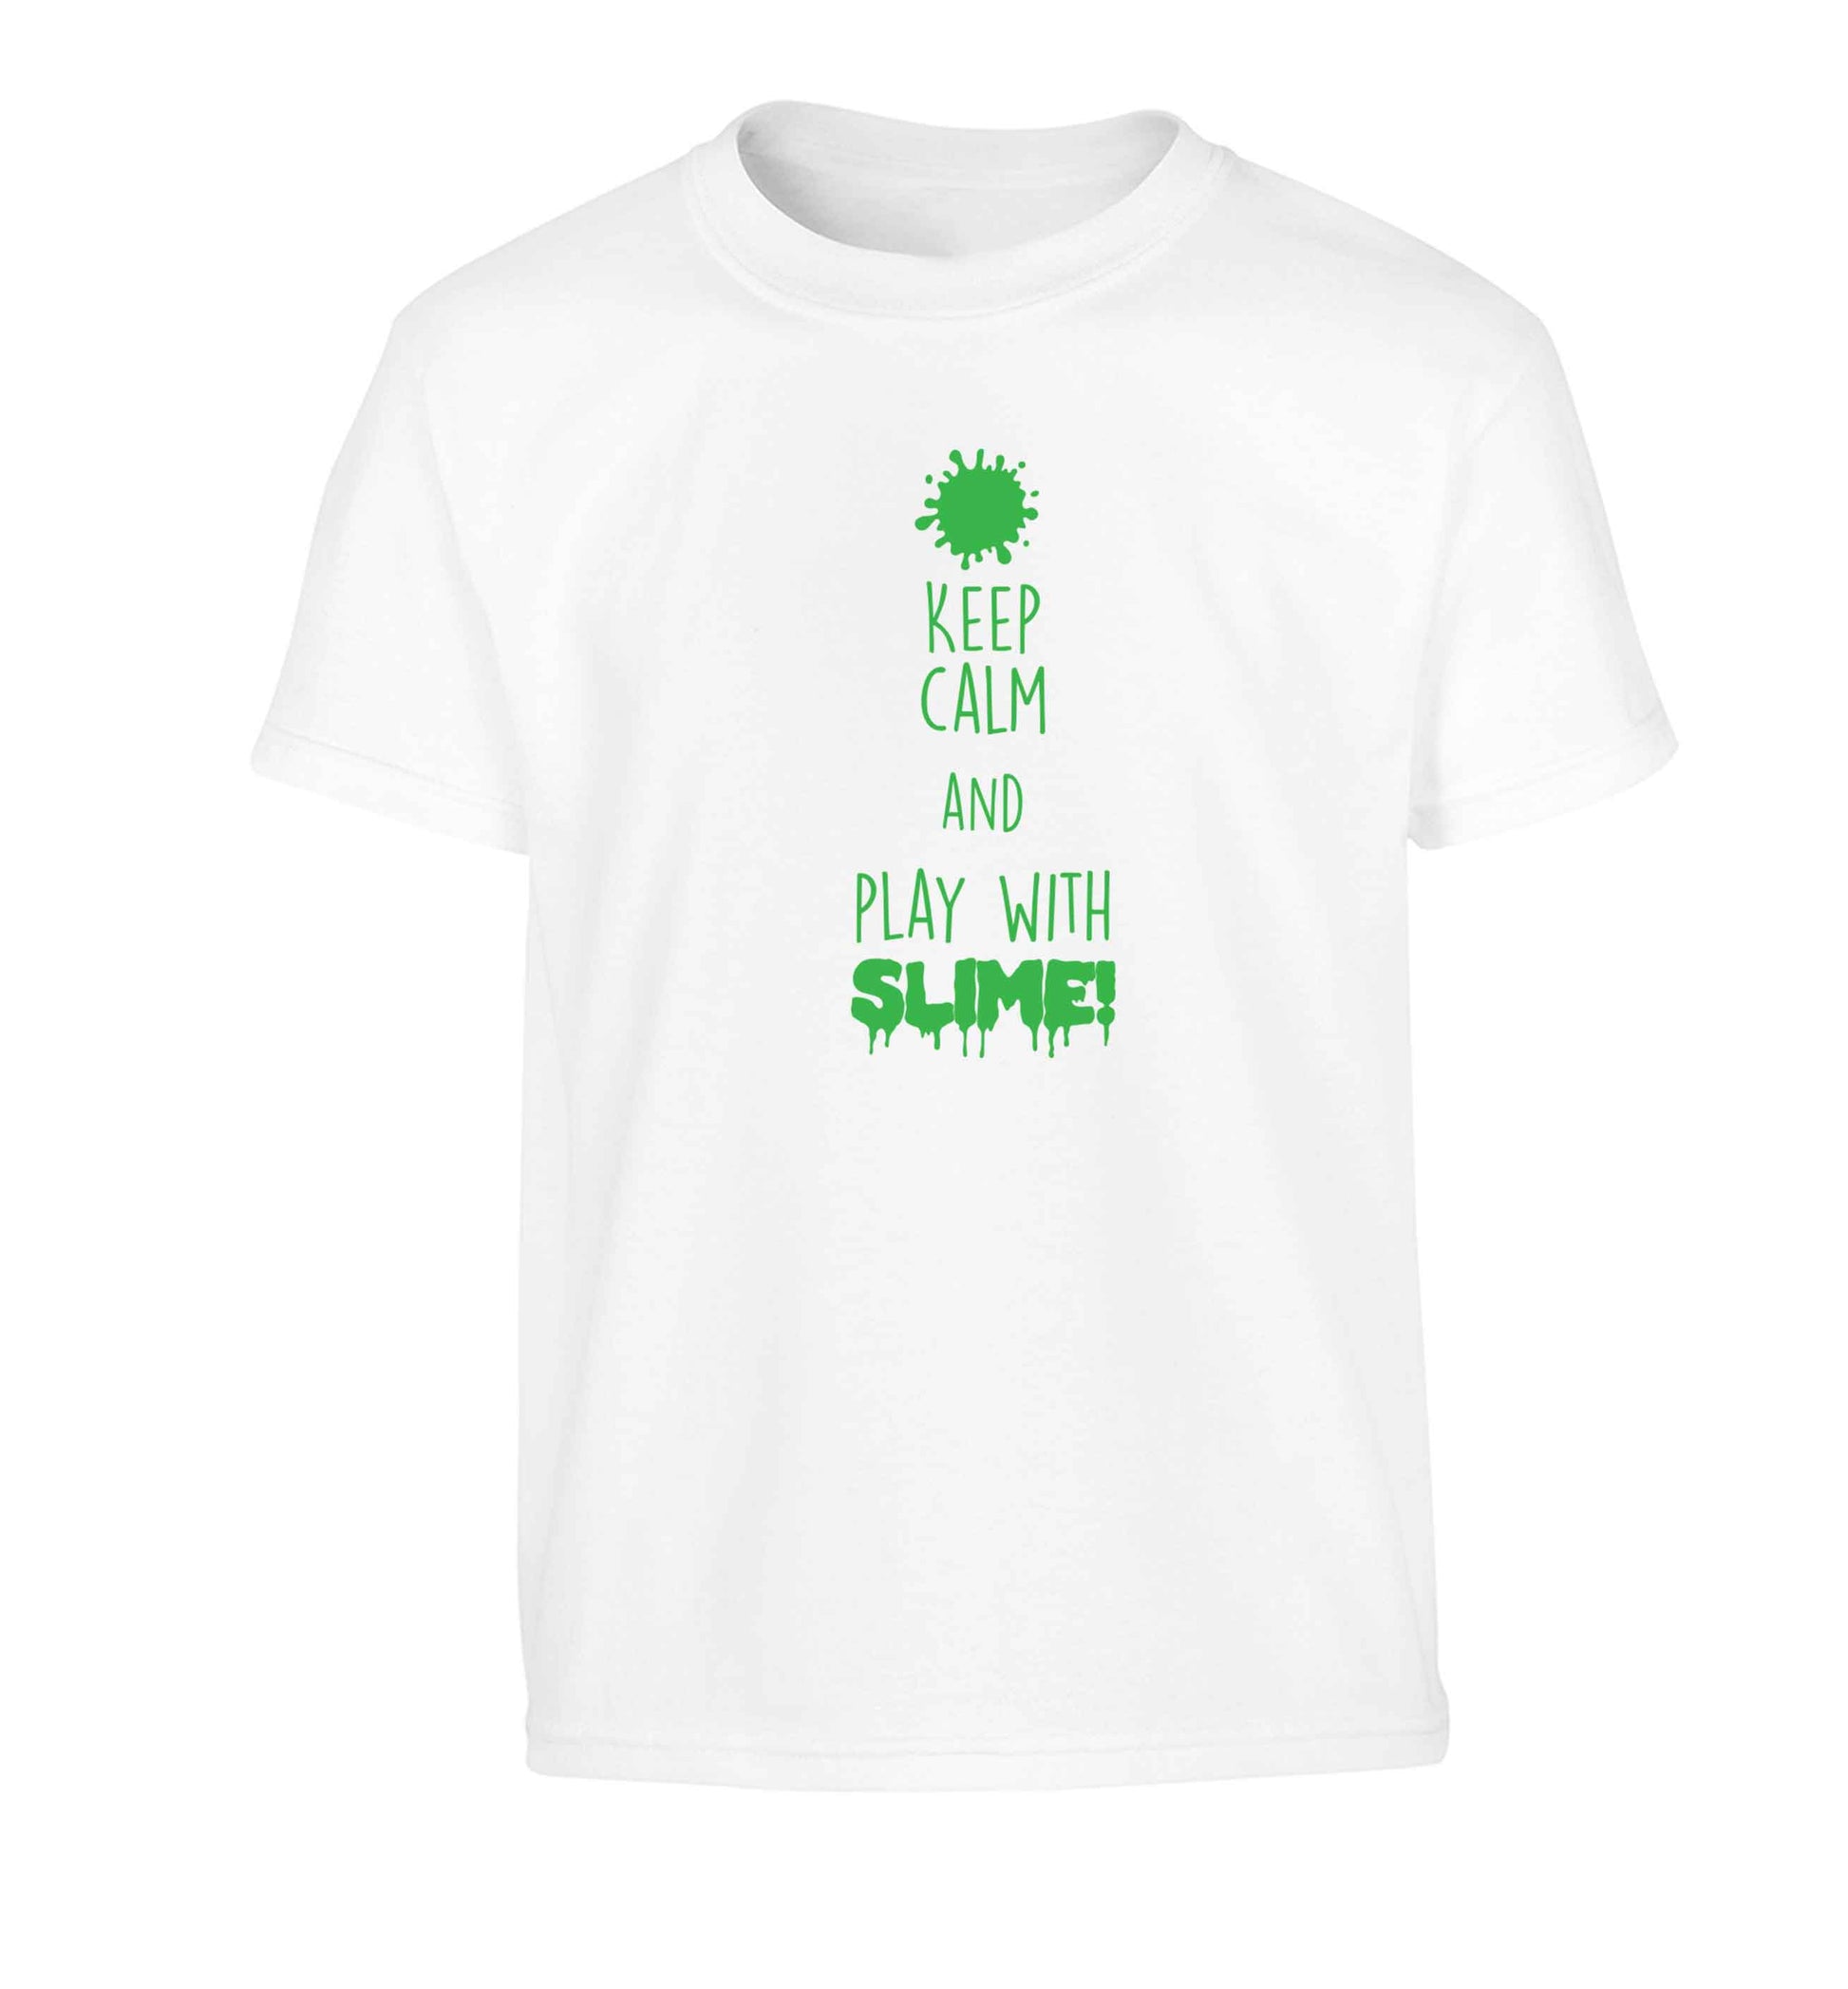 Neon green keep calm and play with slime!Children's white Tshirt 12-13 Years